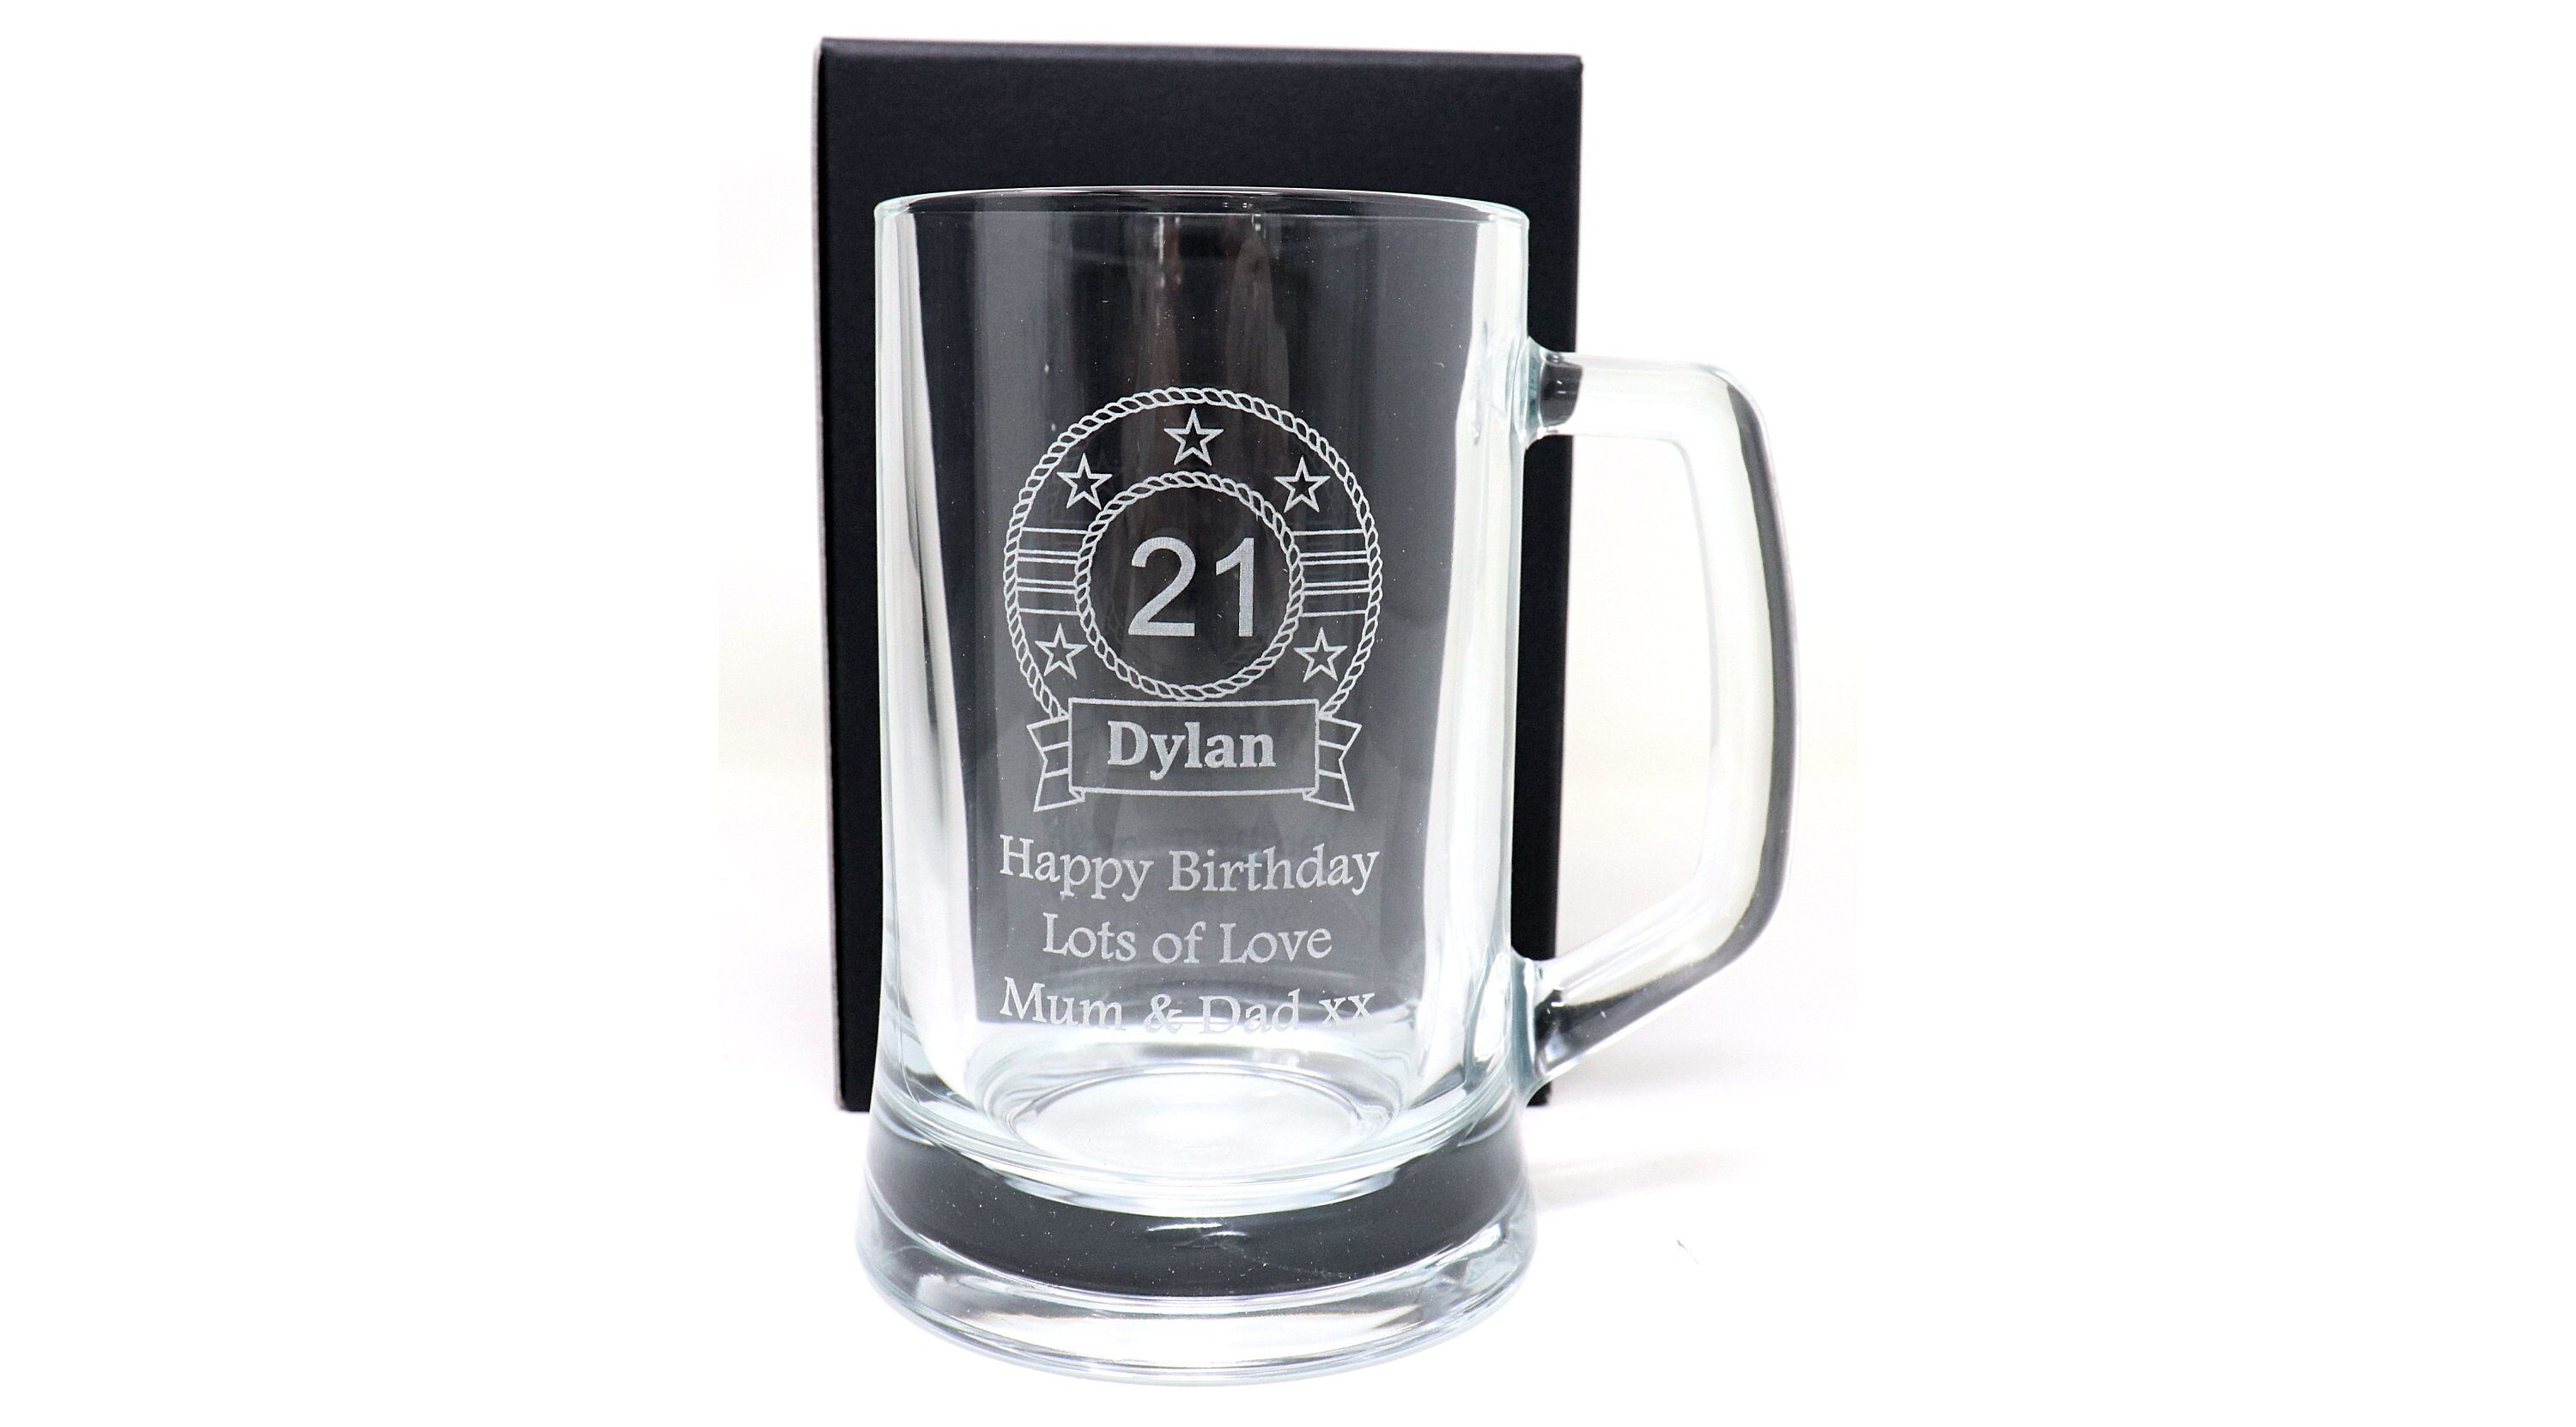 Vintage 1963 Etched 16oz Pint Beer Pub Drinking Glass Cup –  Happy 60th Birthday Gifts Men Women, Cheers to Turning 60 Year Old Woman  Decorations Decor, Anniversary Bday Party Favors